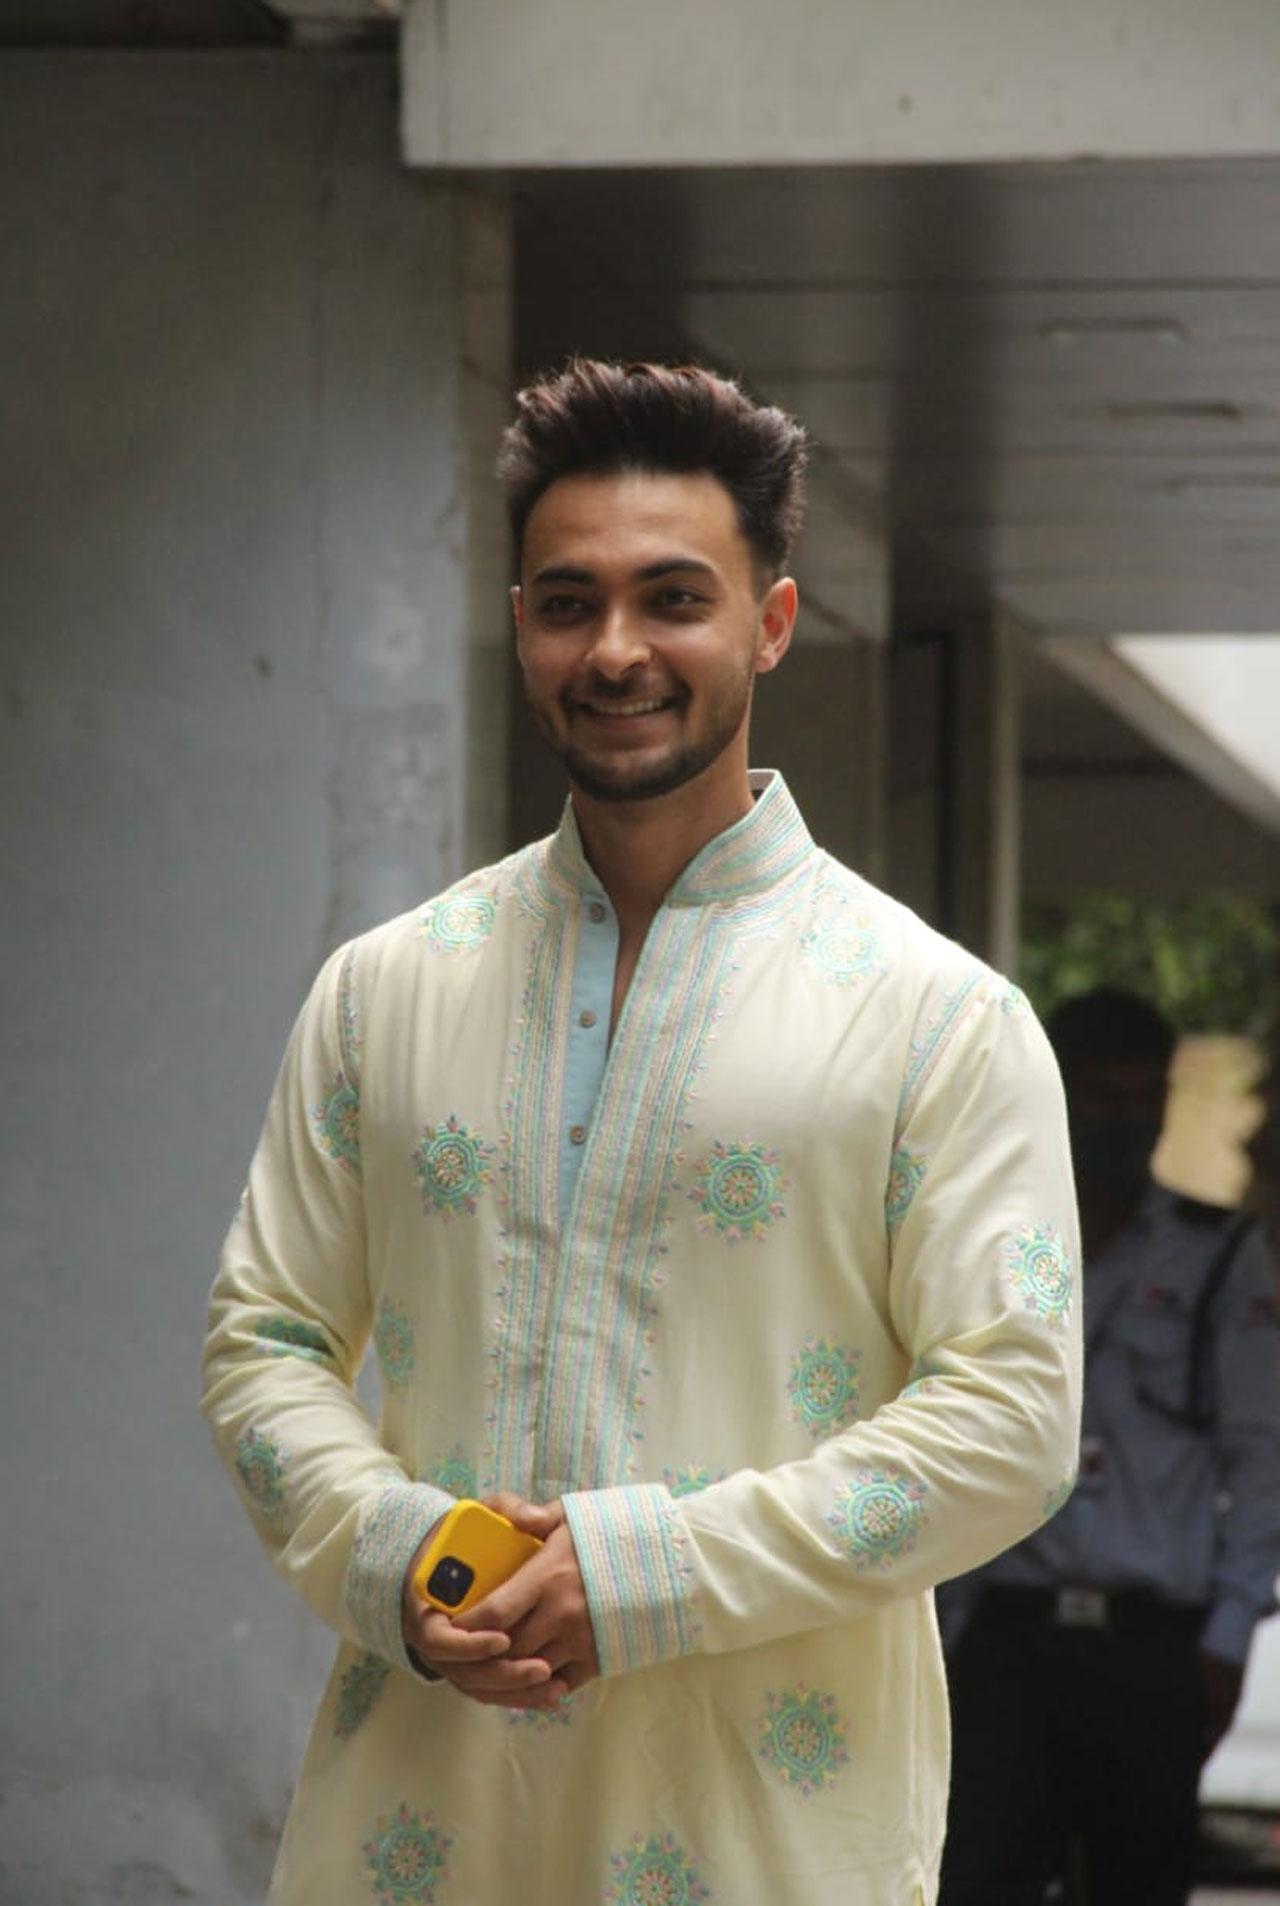 Aayush Sharma was looking dapper as he arrived in a tradional avatar at Sohail Khan's residence for Ganpati celebrations. He's also gearing up for the release of his next film 'Antim- The Final Truth' co-starring Salman Khan.